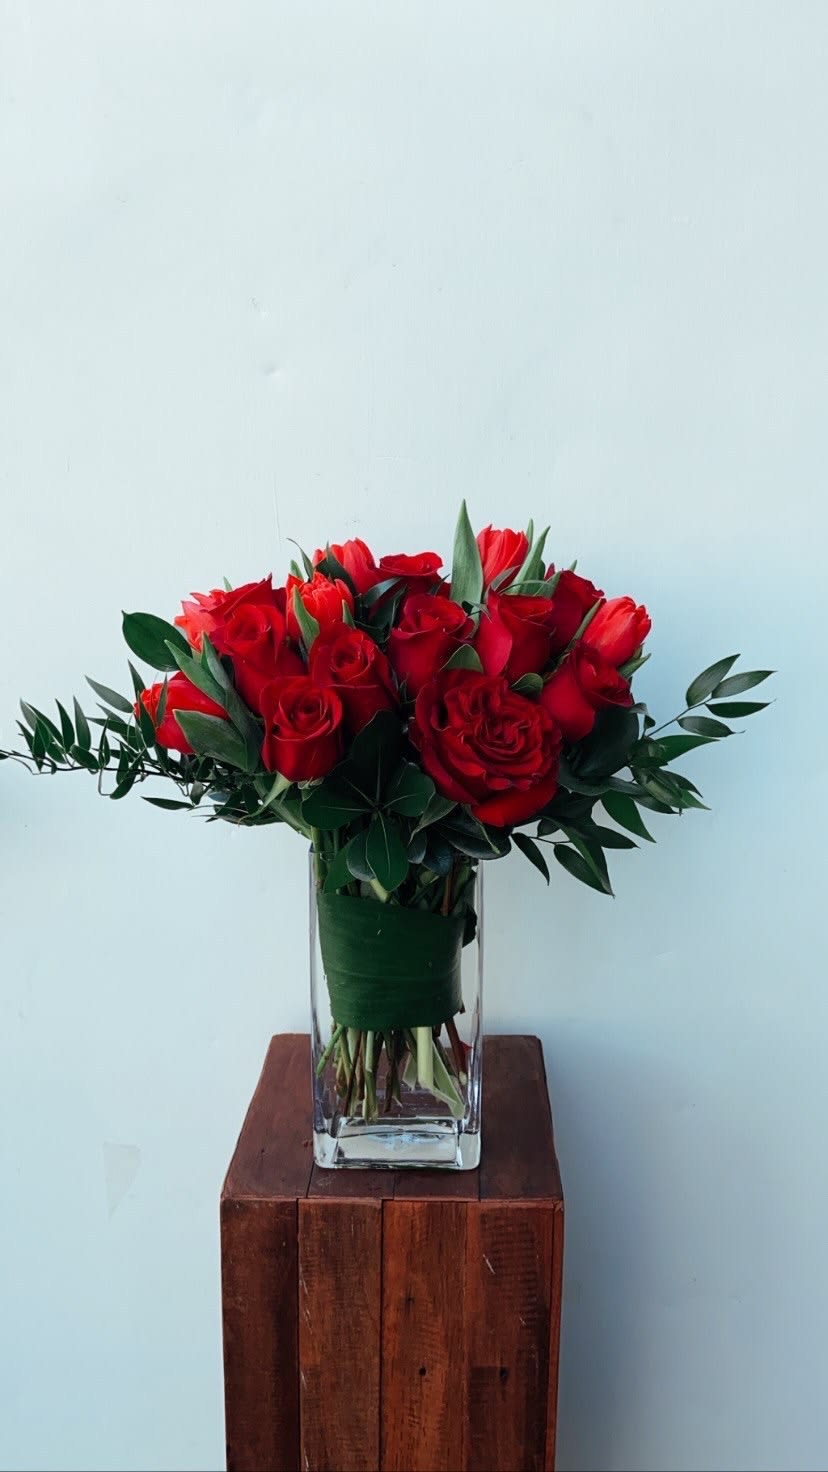 Modern design of red roses and tulips with elegant accents.